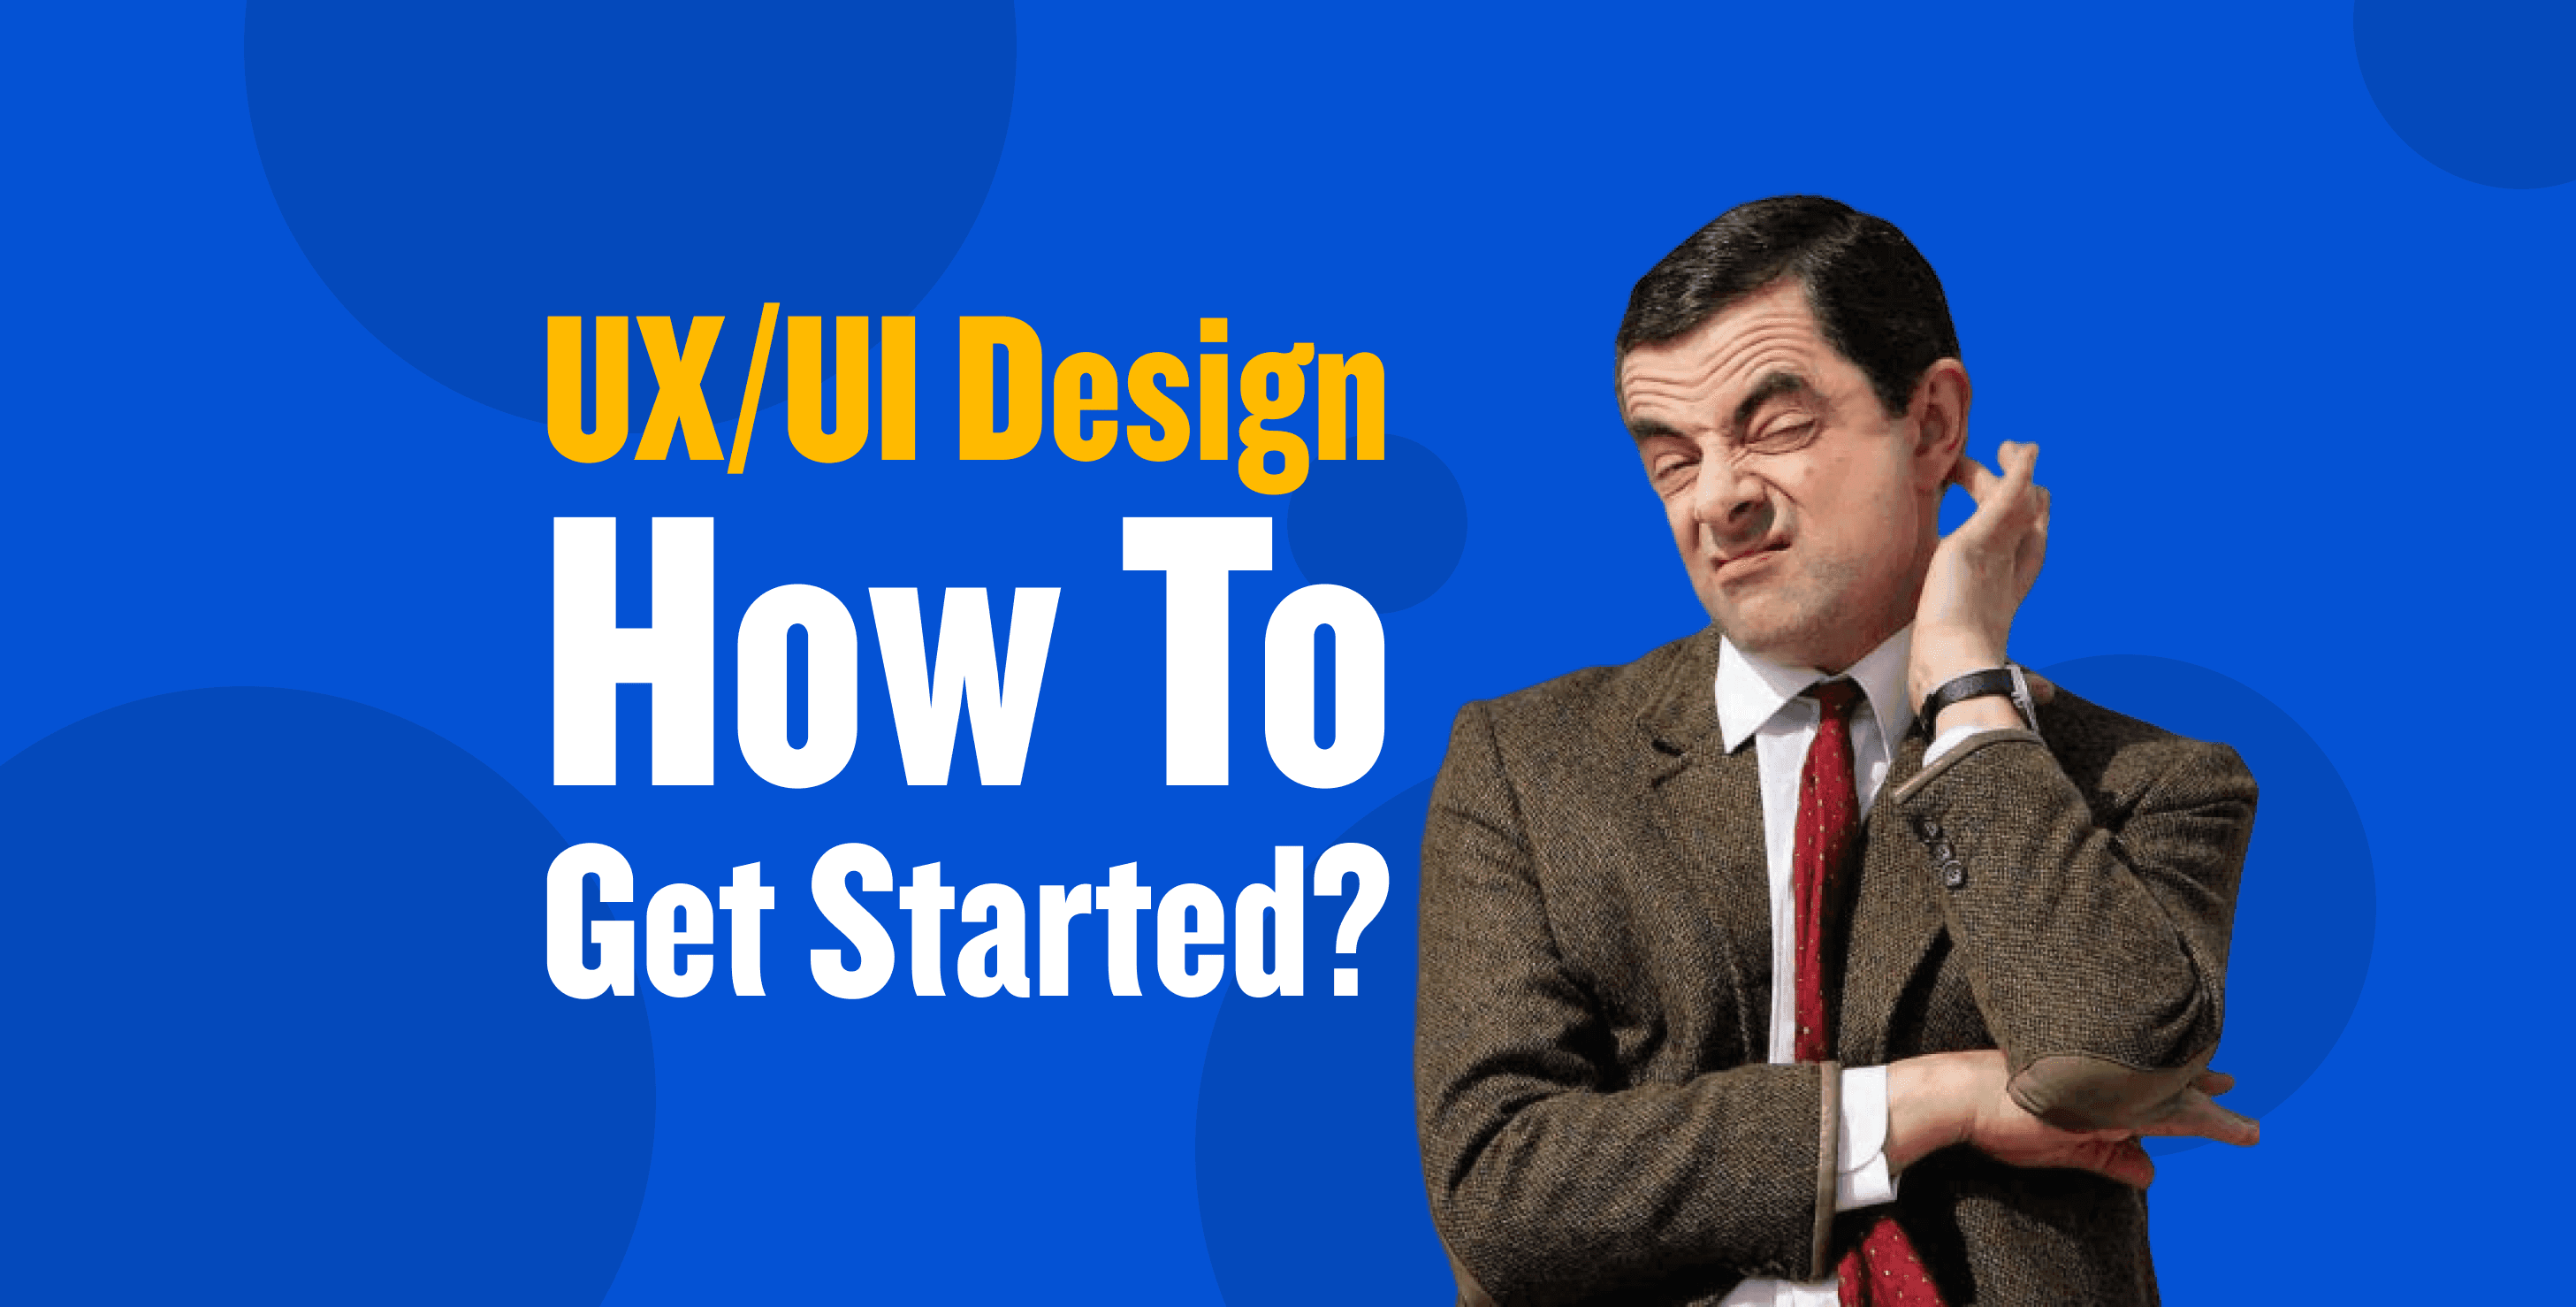 UX/UI design: How to get started